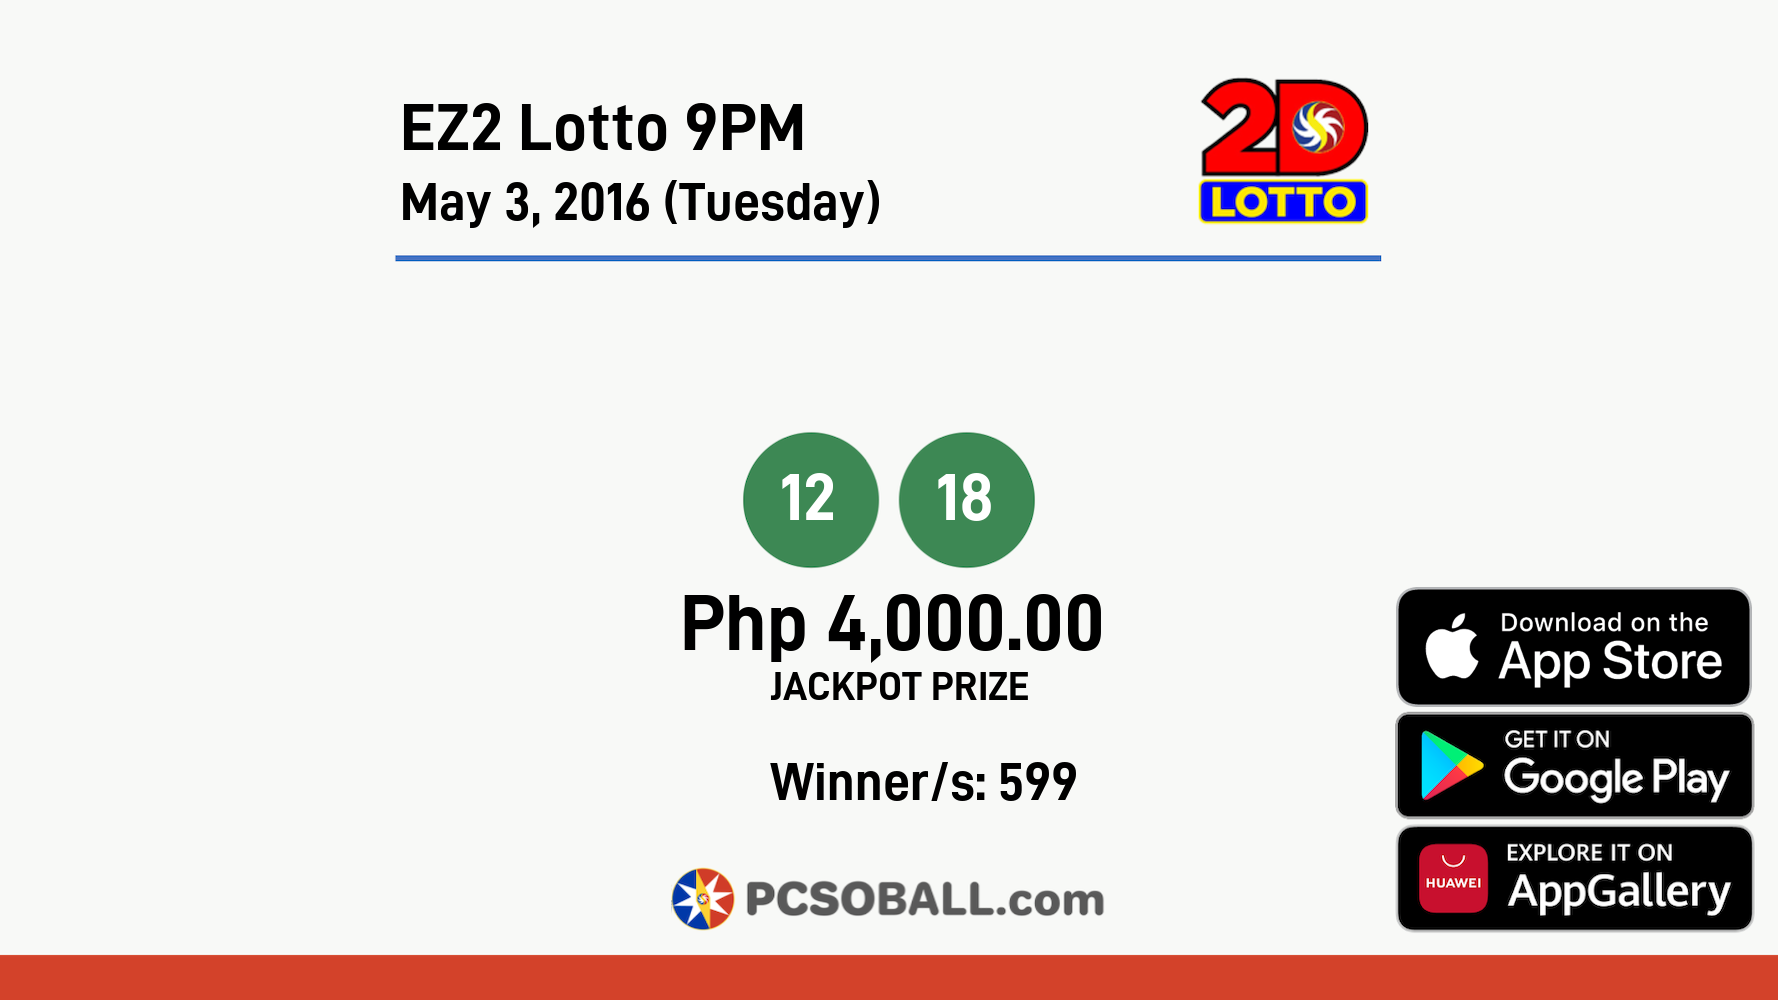 EZ2 Lotto 9PM May 3, 2016 (Tuesday) Result